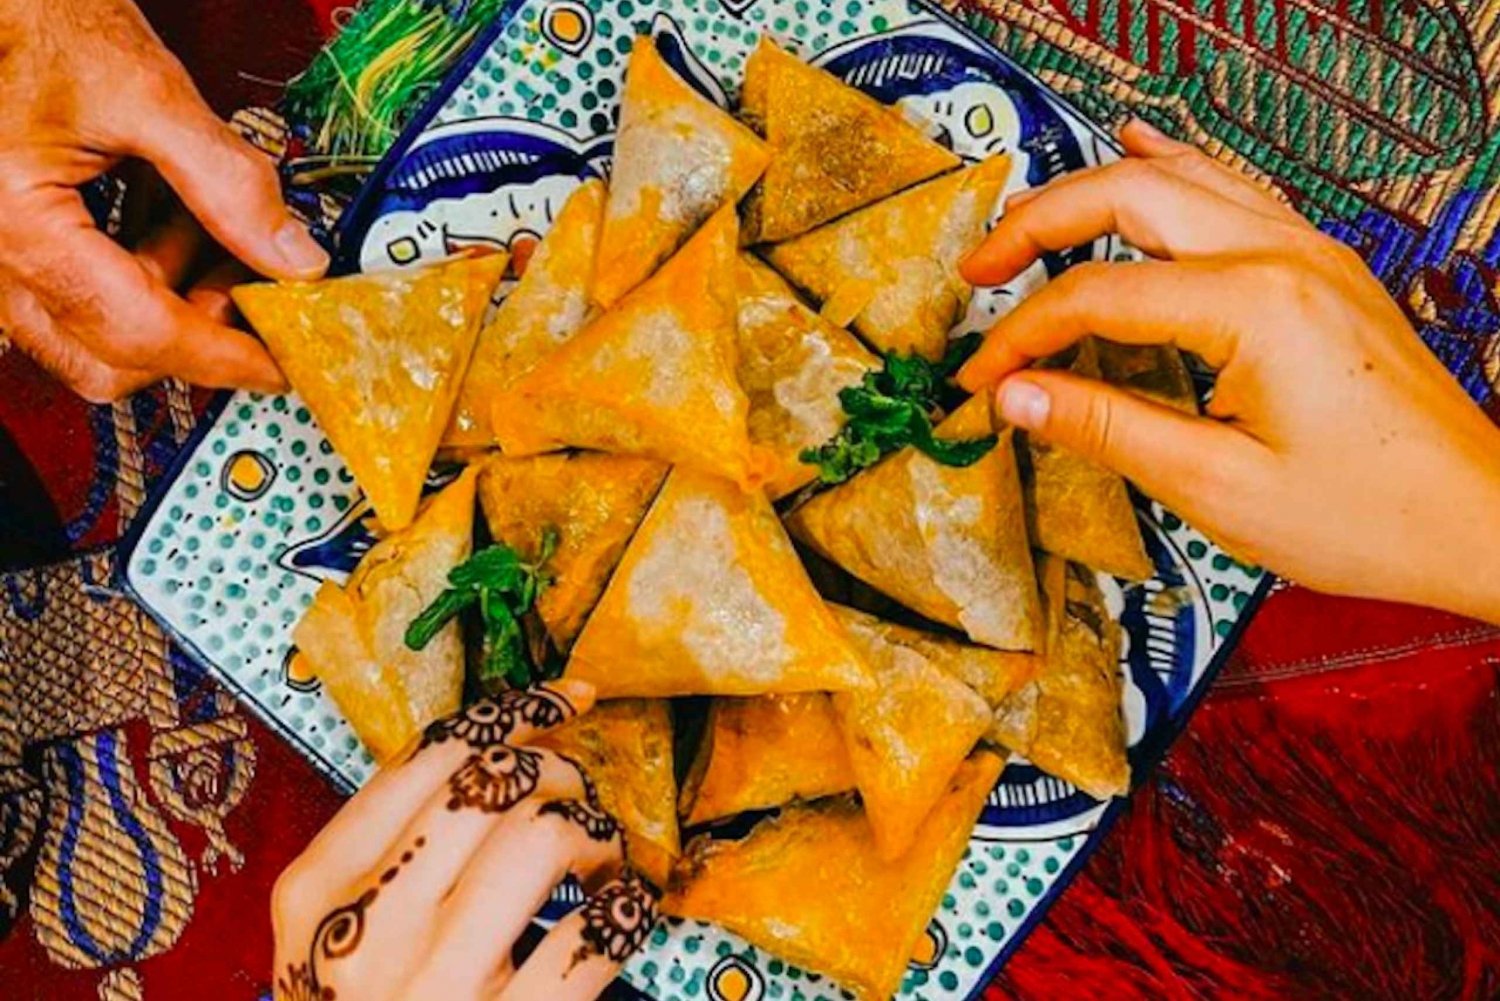 Marrakech: Traditional Moroccan Cooking Class & Market Visit